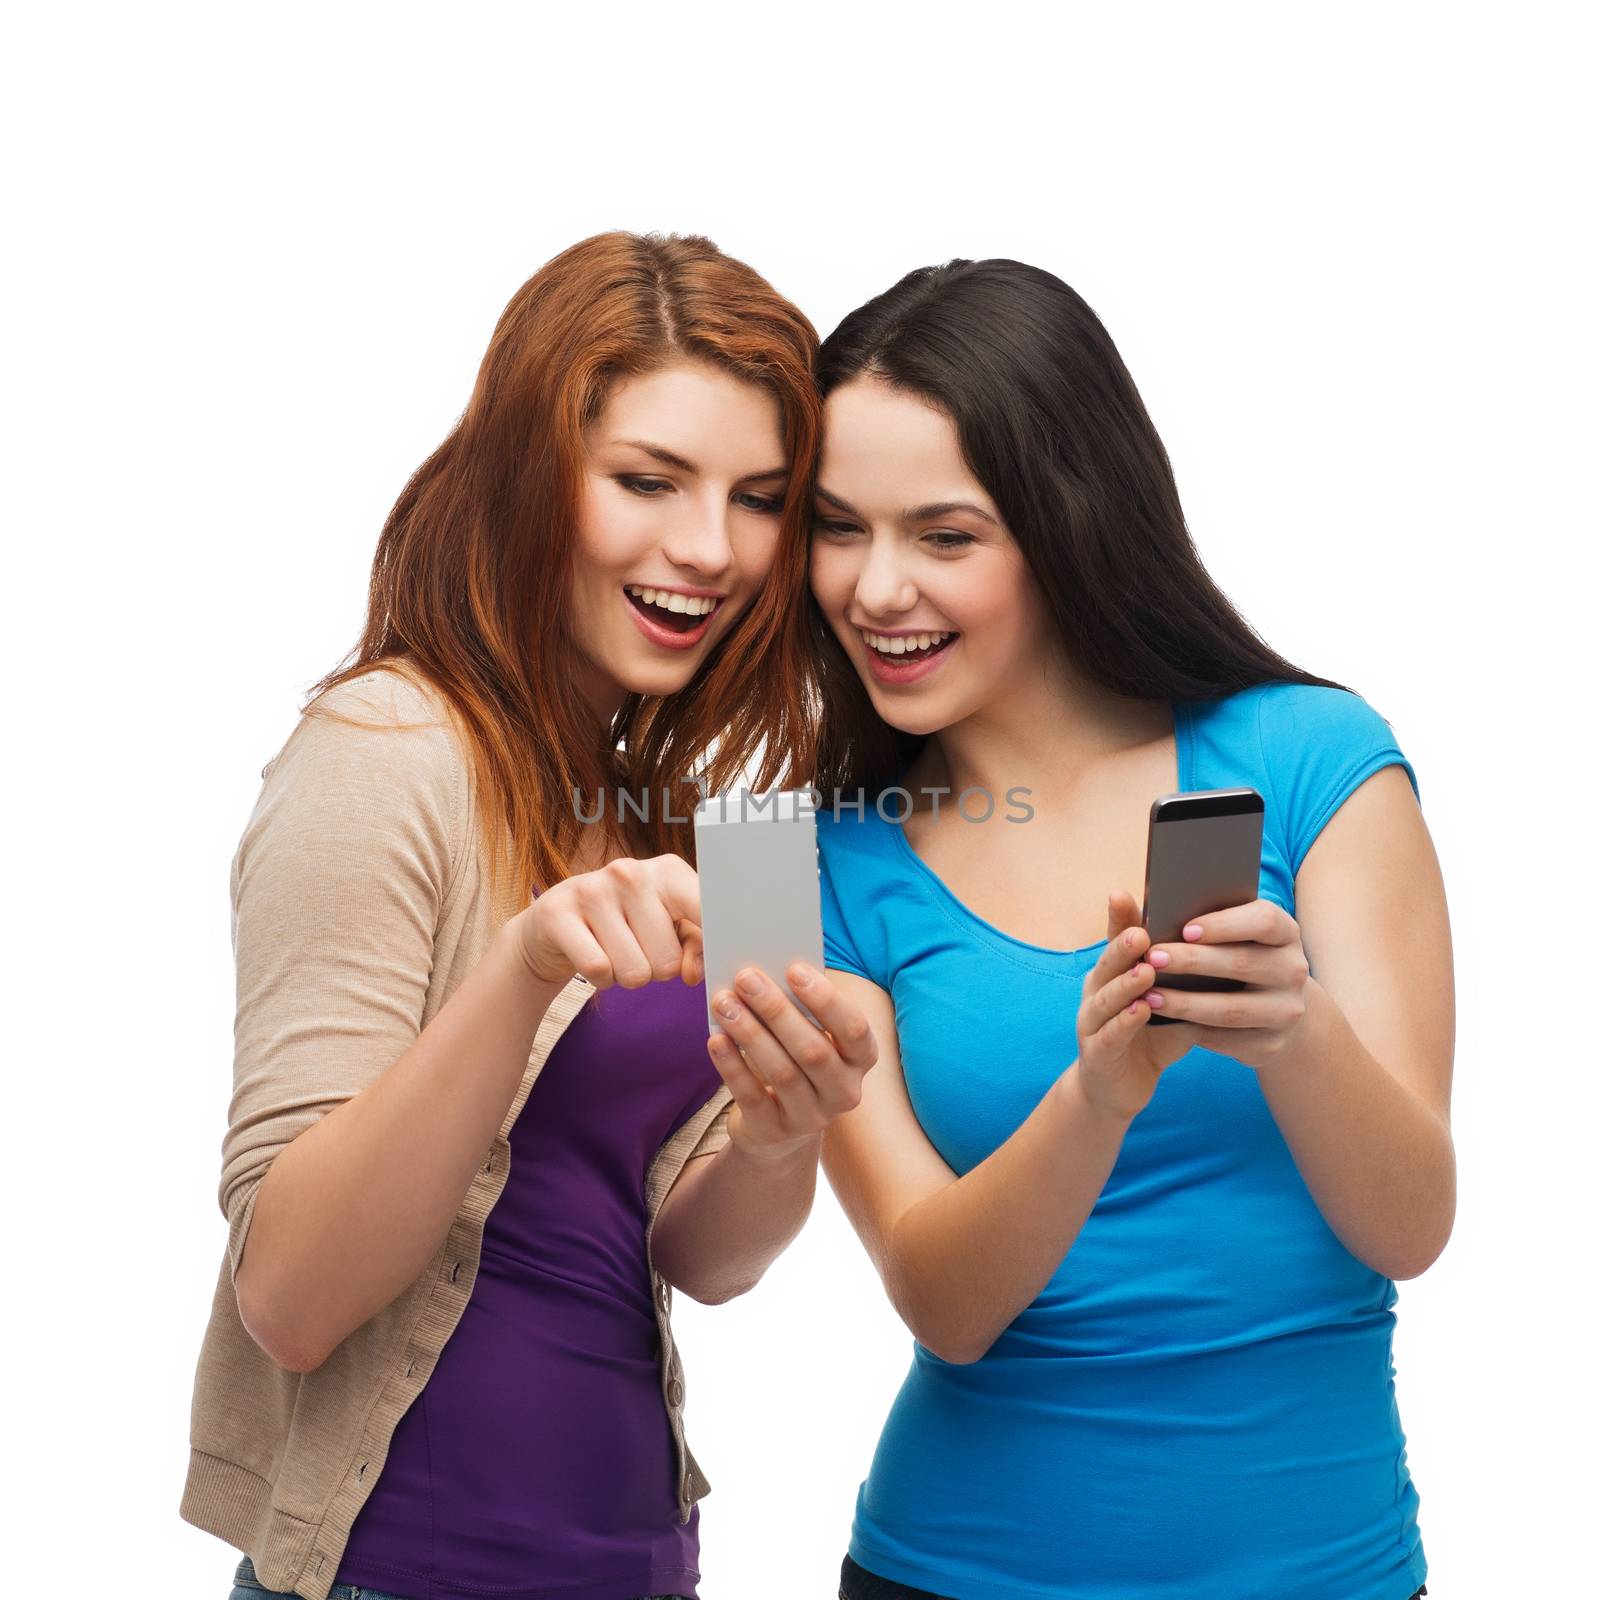 two smiling teenagers with smartphones by dolgachov